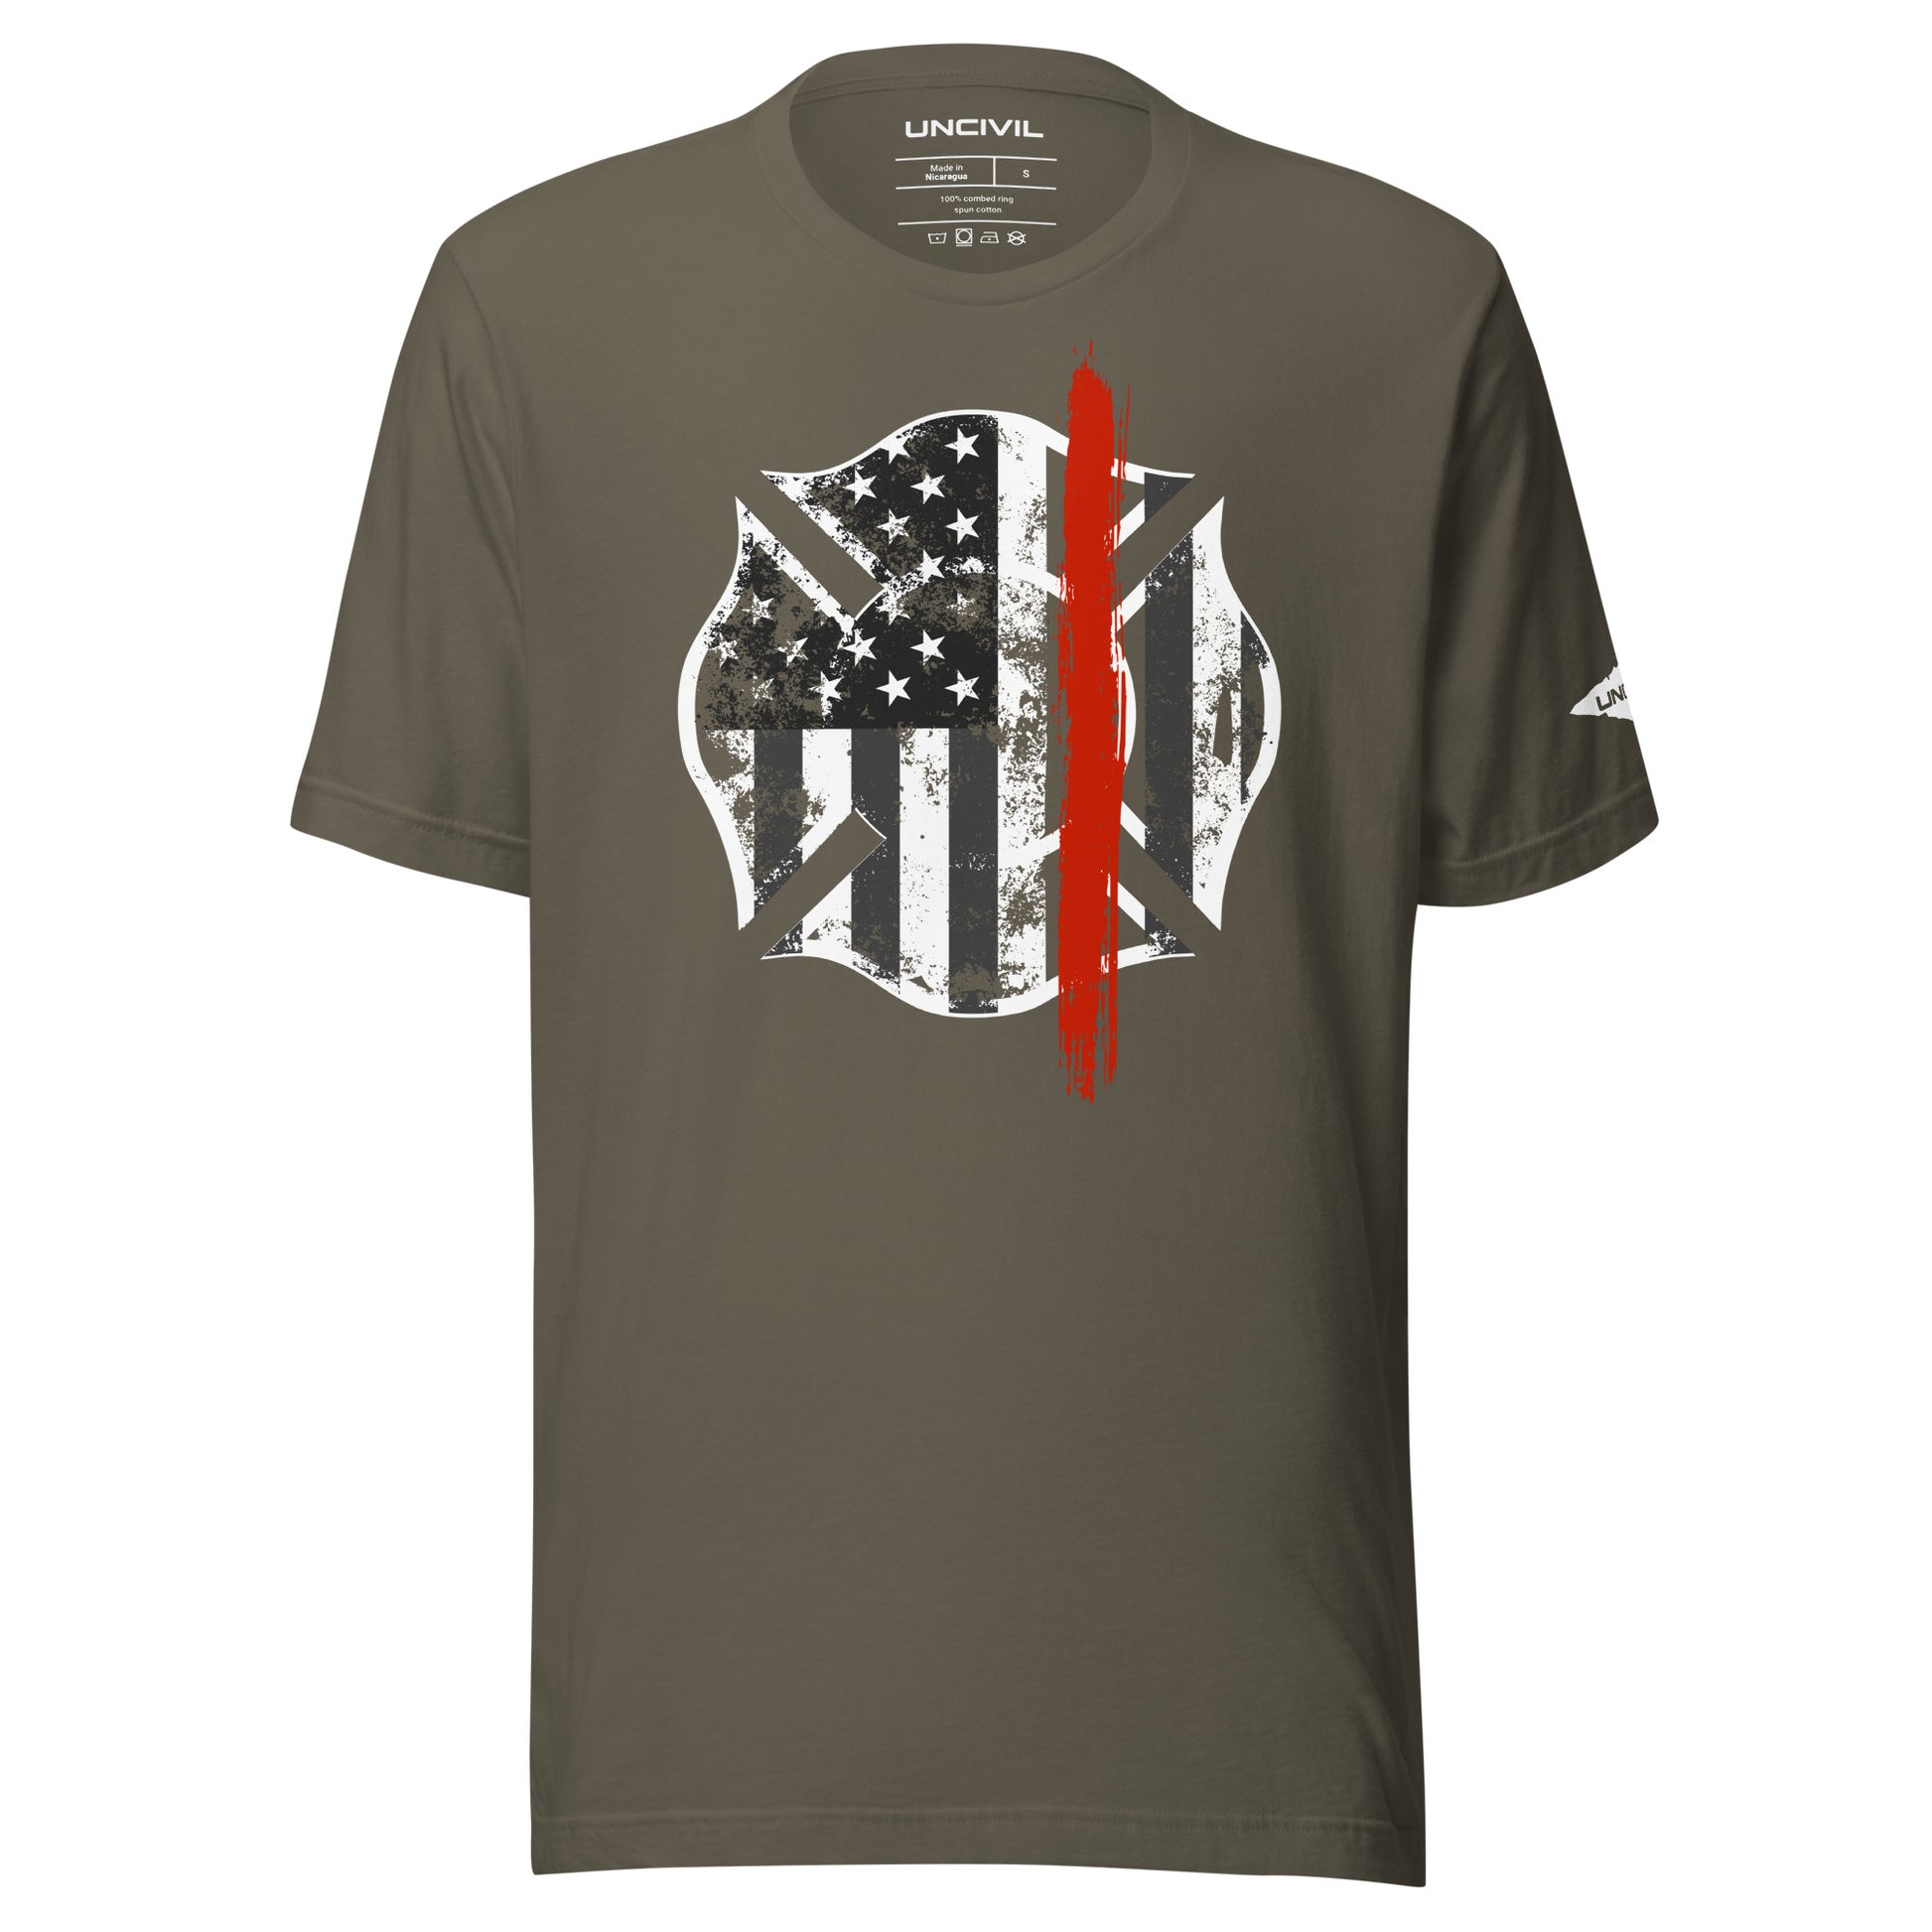 Back the Red t-shirt. Firefighter Thin Red Line shirt in army green.